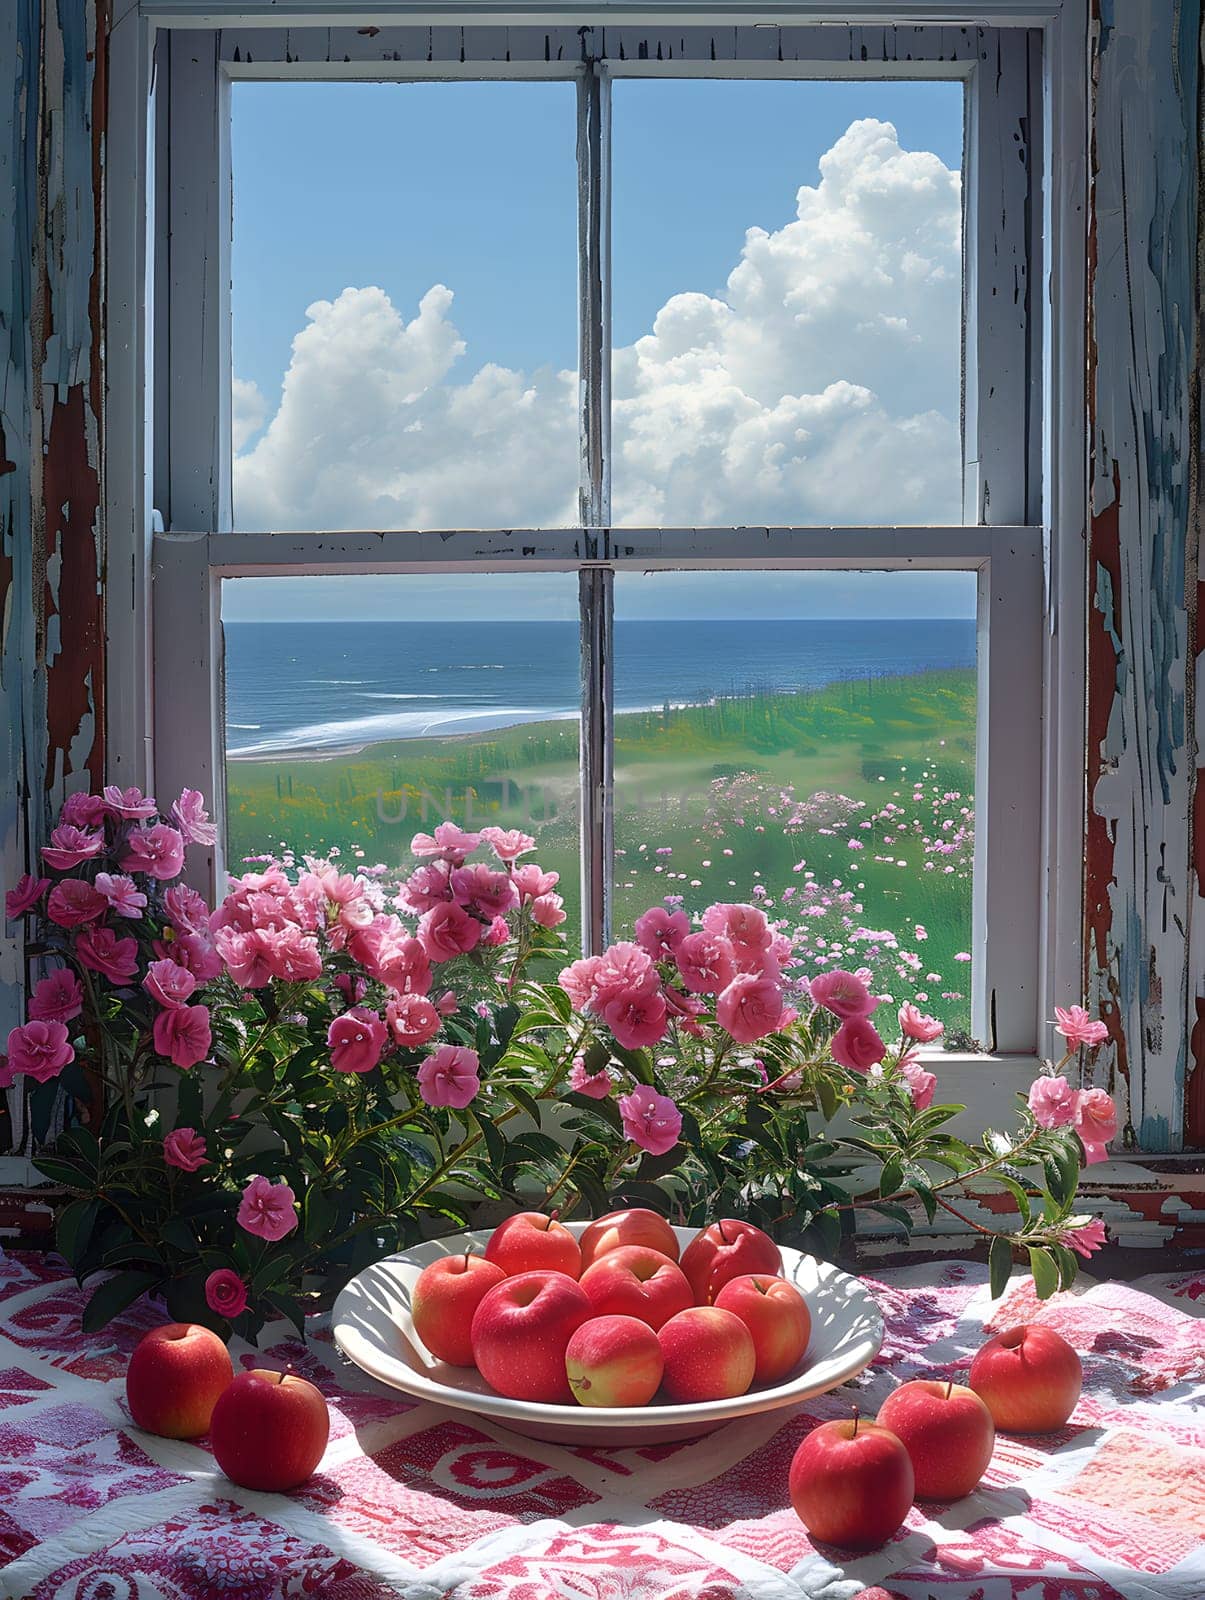 A arrangement of apples decorates a rectangle dishware on a table by a window with a view of the ocean, framed by flower petals and clouds in the sky